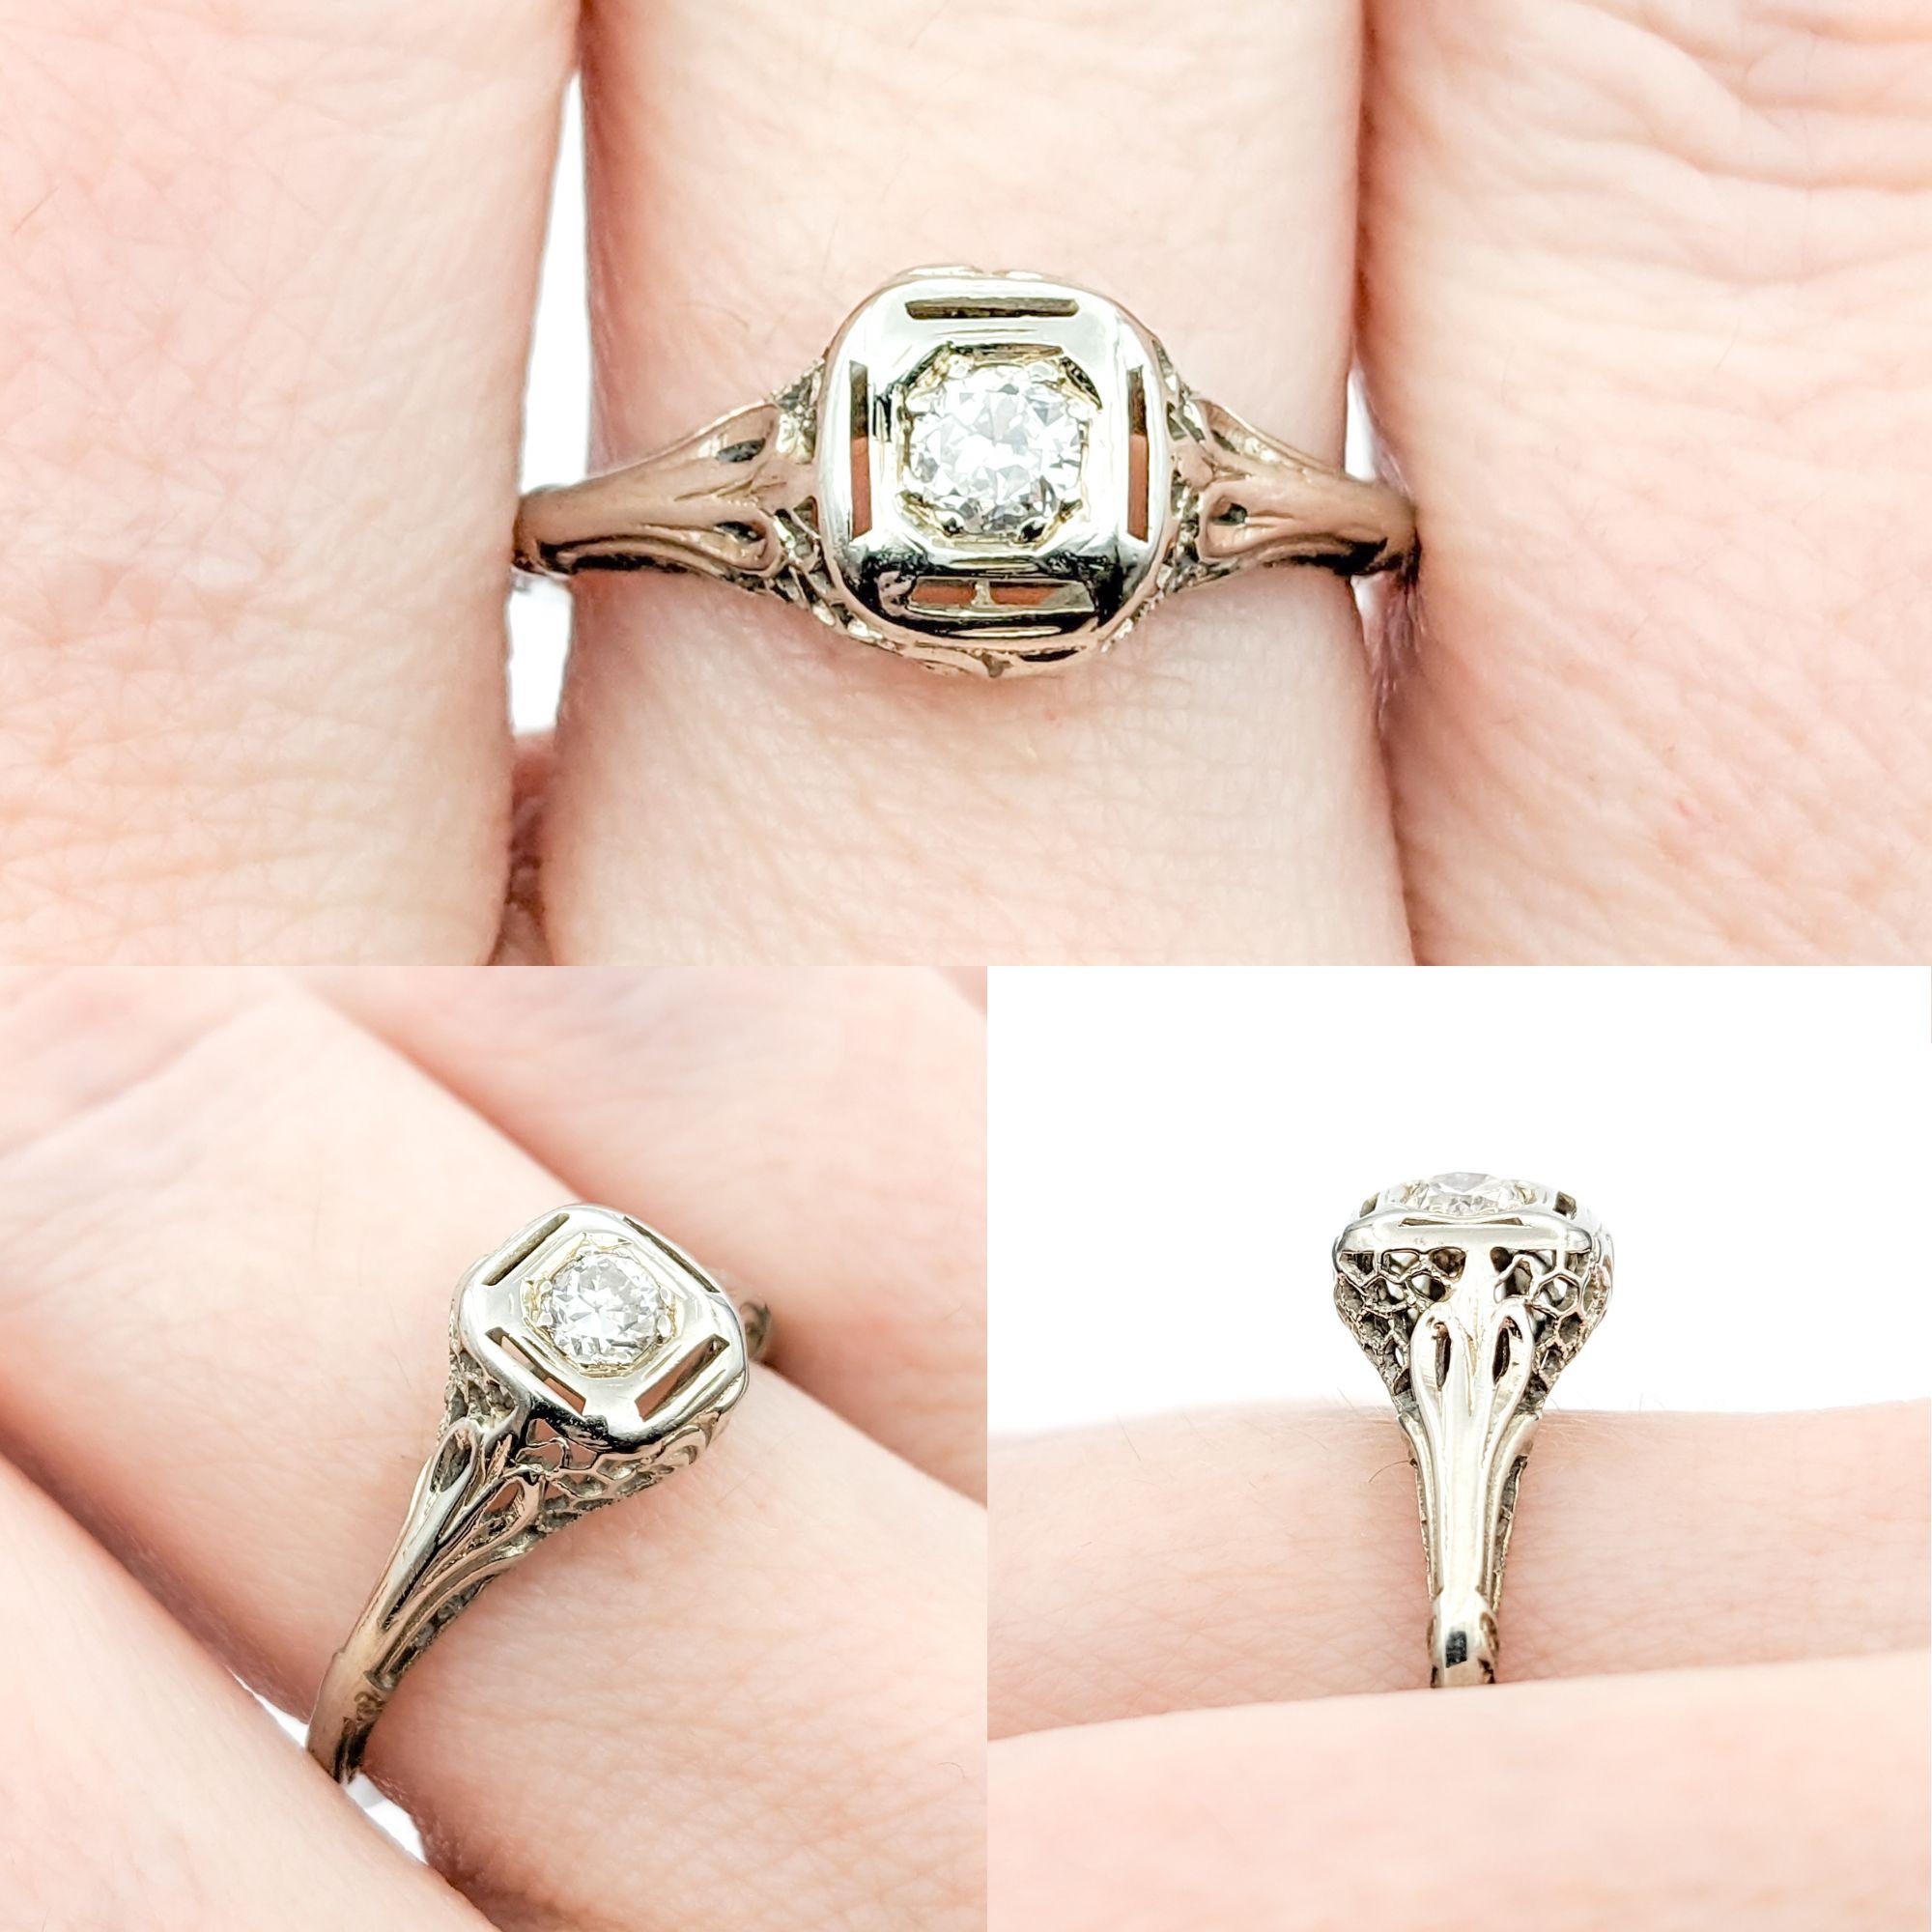 Diamond Art Deco Filigree Ring In White Gold

Introducing this beautiful Antique Ring crafted in 18k white gold. This Art Deco Filigree ring elegantly showcases a .15ct Old European Diamond as its centerpiece, combining vintage charm with a touch of